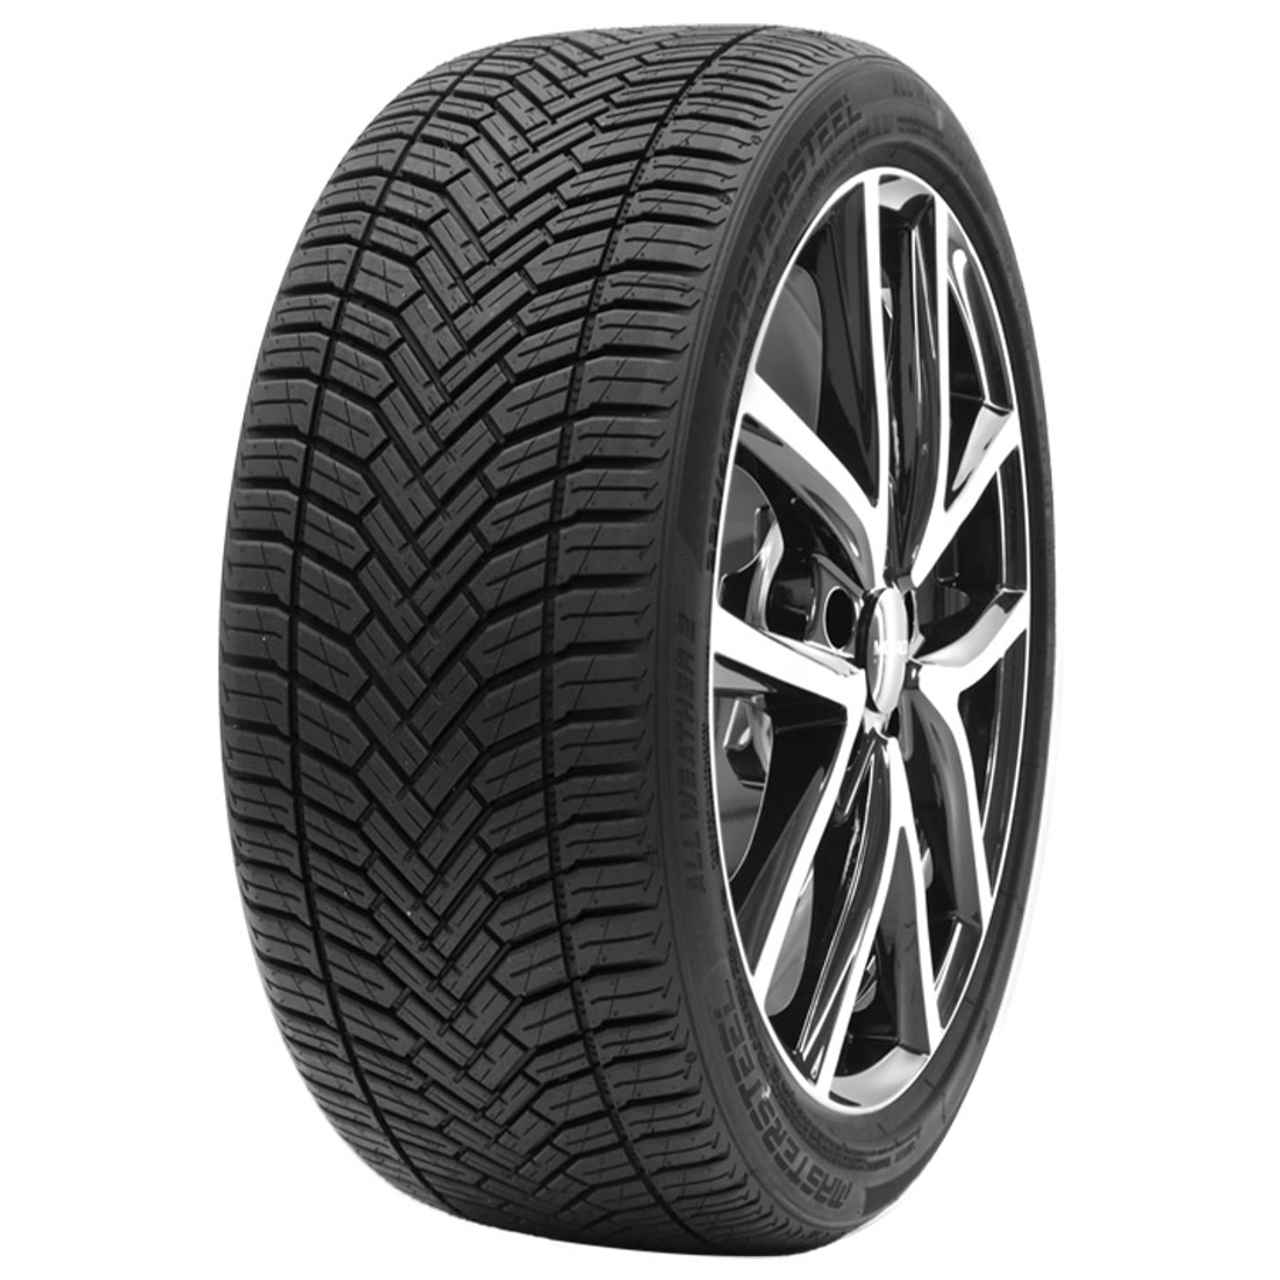 MASTERSTEEL ALL WEATHER 2 175/70R14 88T BSW